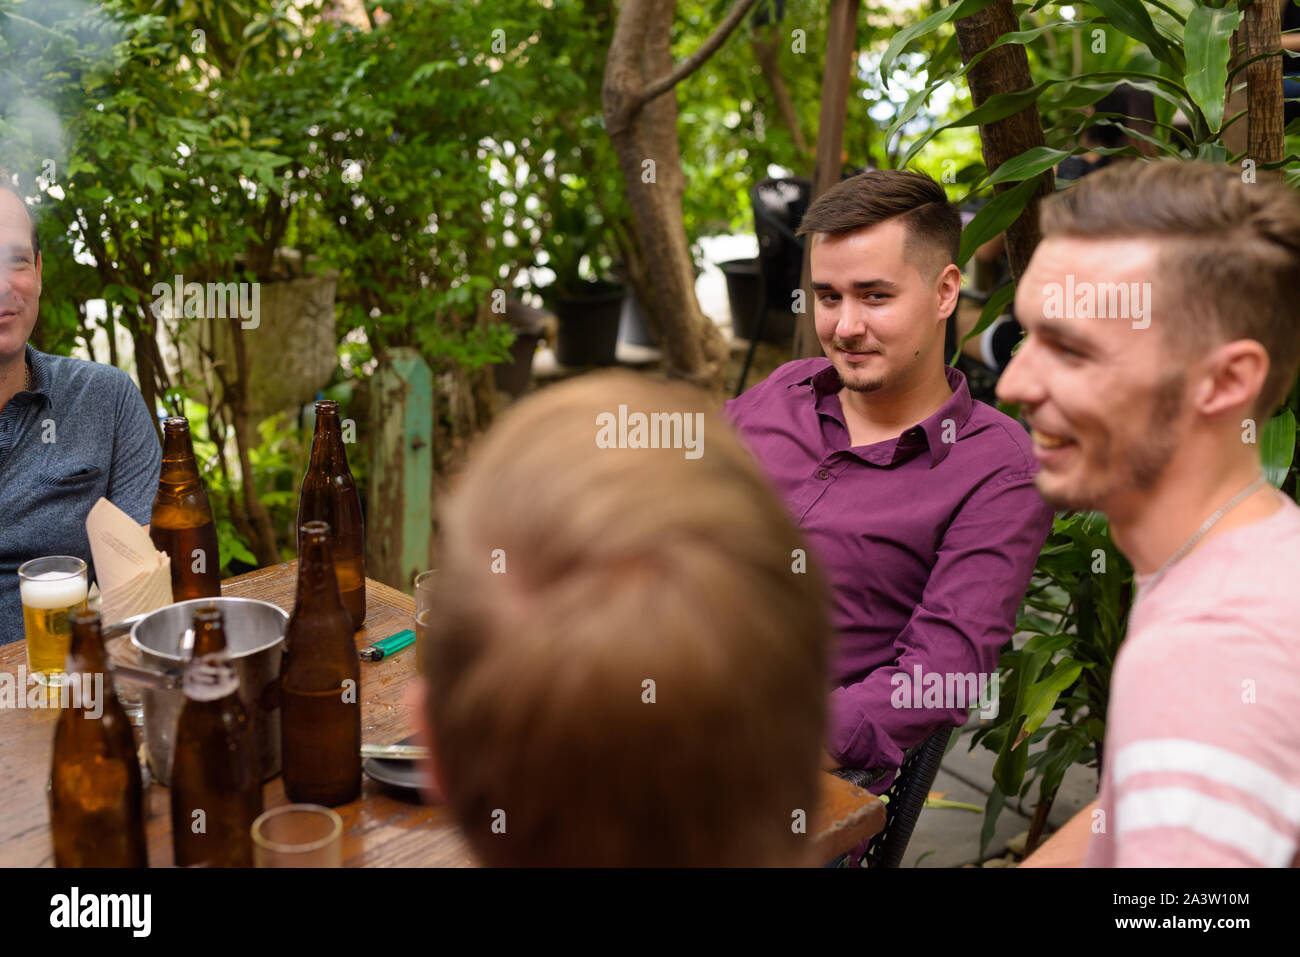 Group of men outdoors sitting and drinking beer Stock Photo